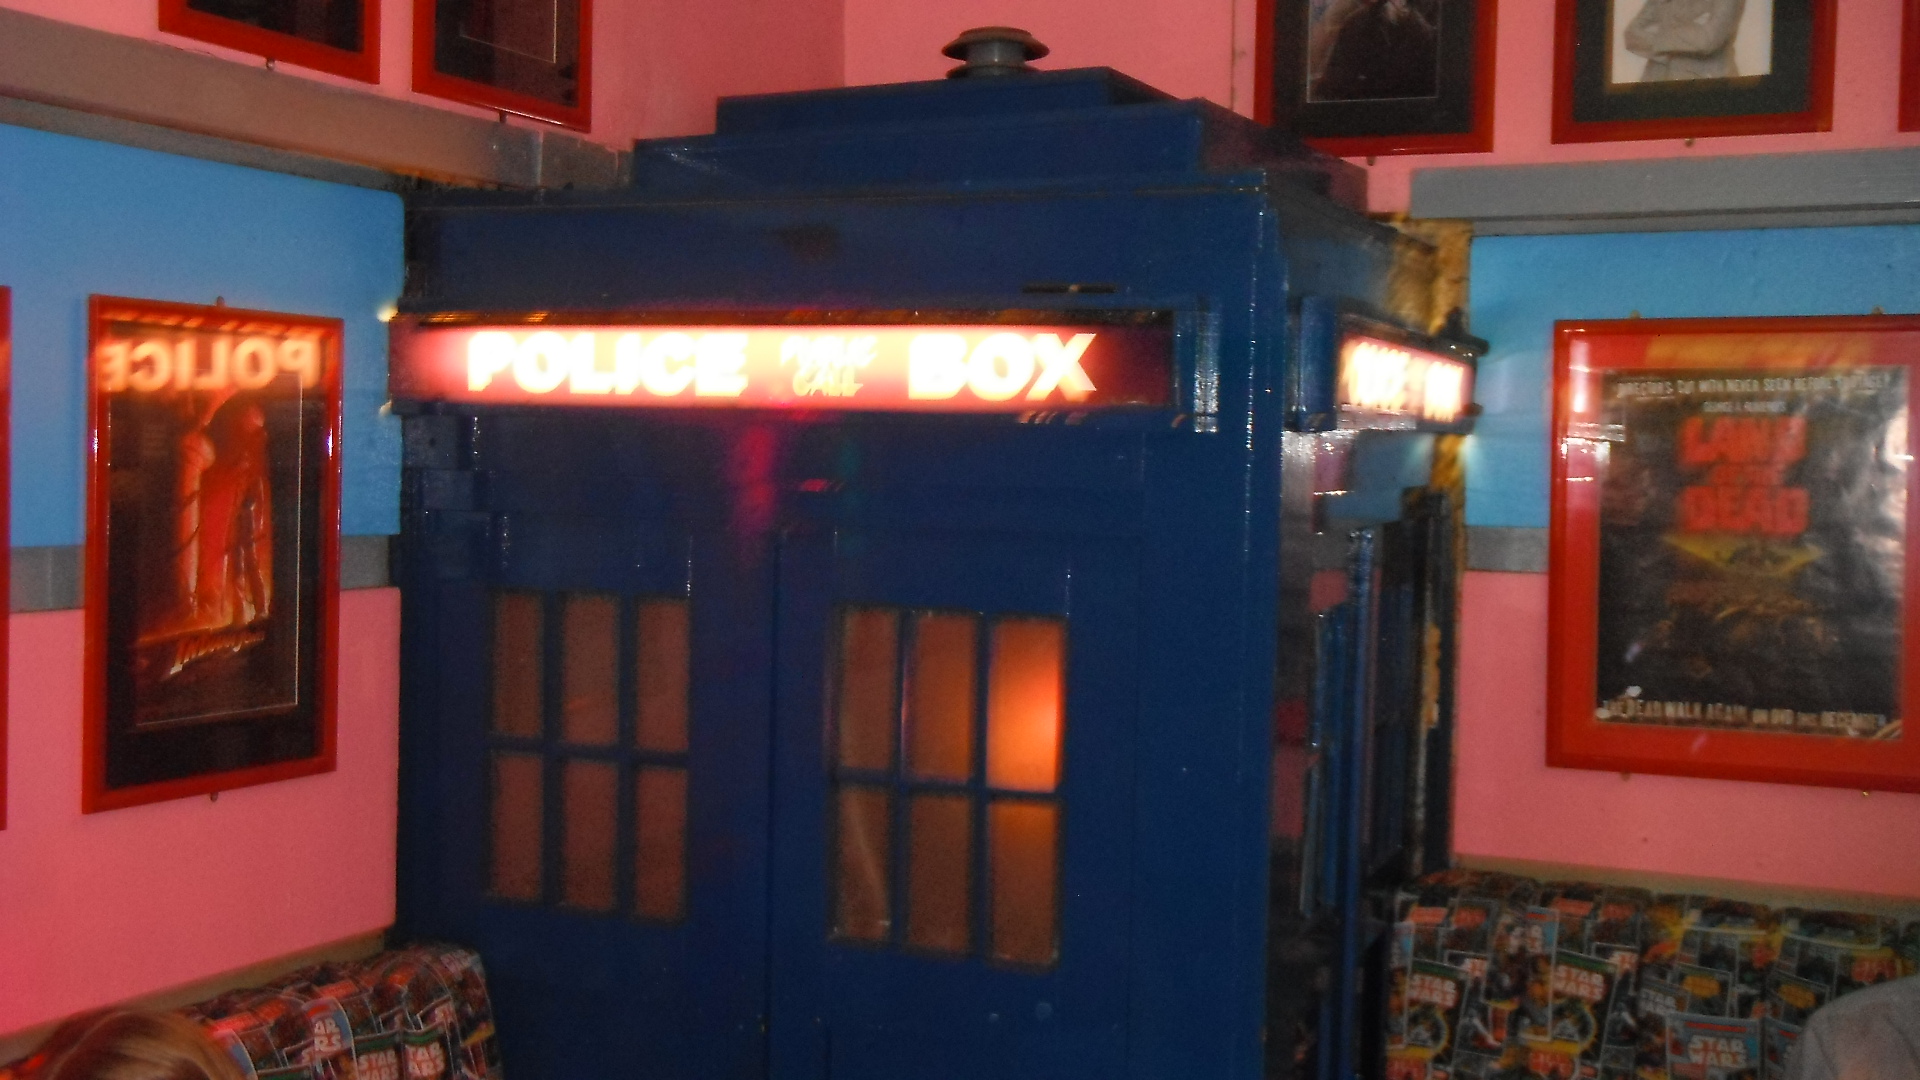 Dr Who TARDIS  time machine, taken by me in FAB Cafe, Manchester 